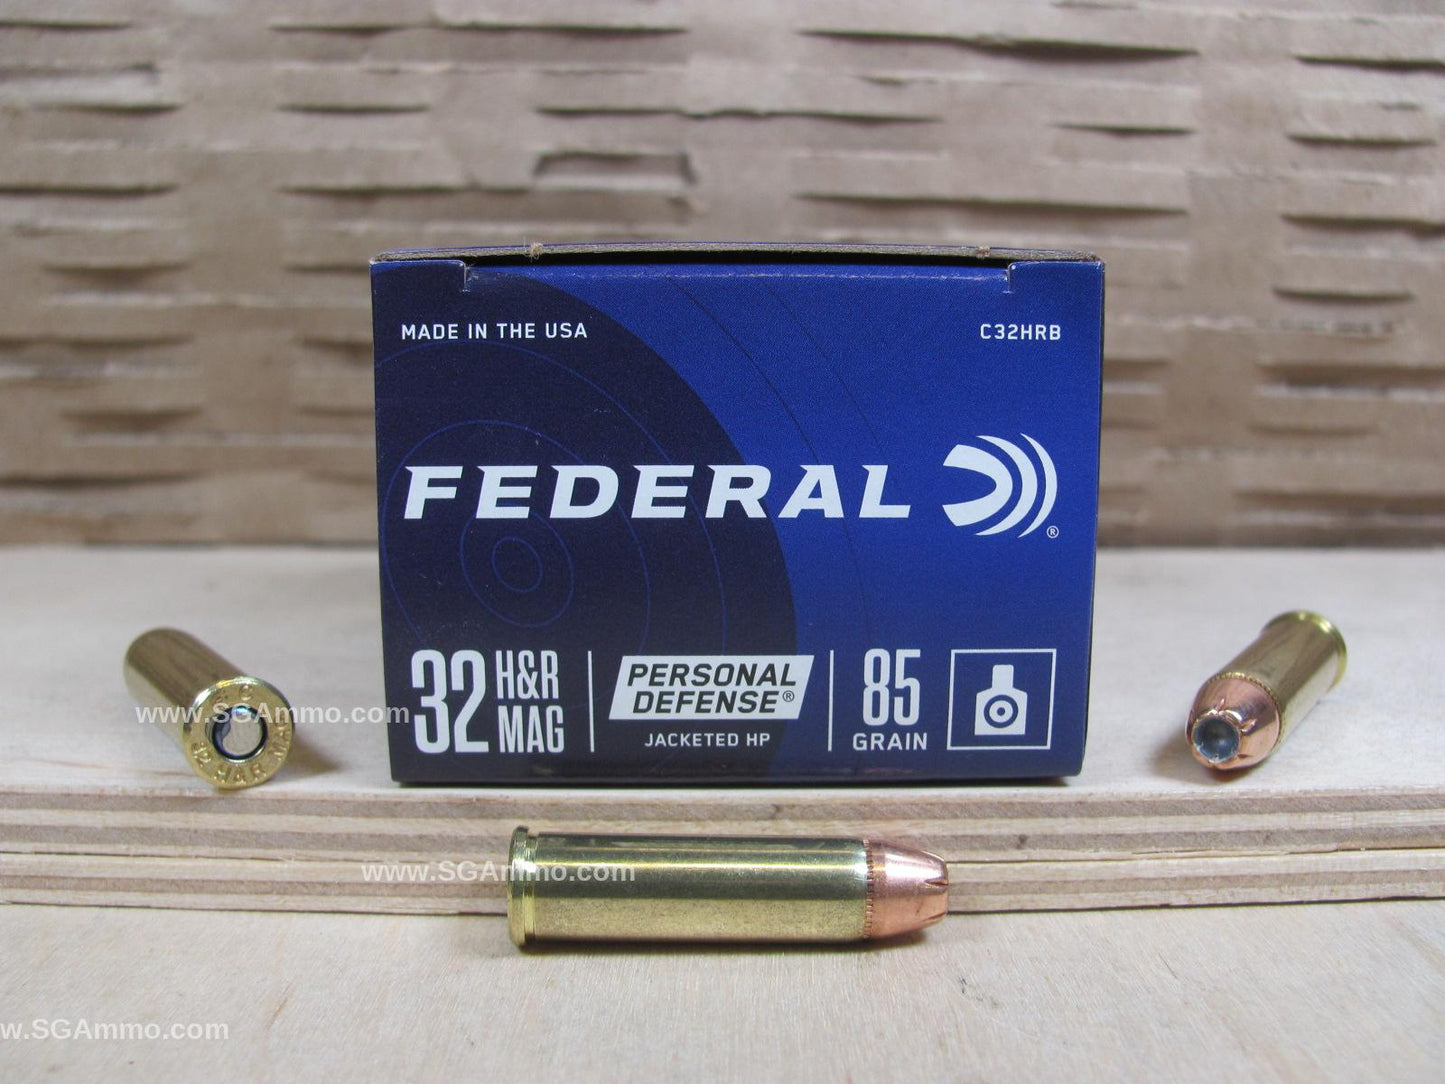 32 H&R Magnum Federal 85 Grain Jacketed Hollow Point Ammo - 500 Round Case